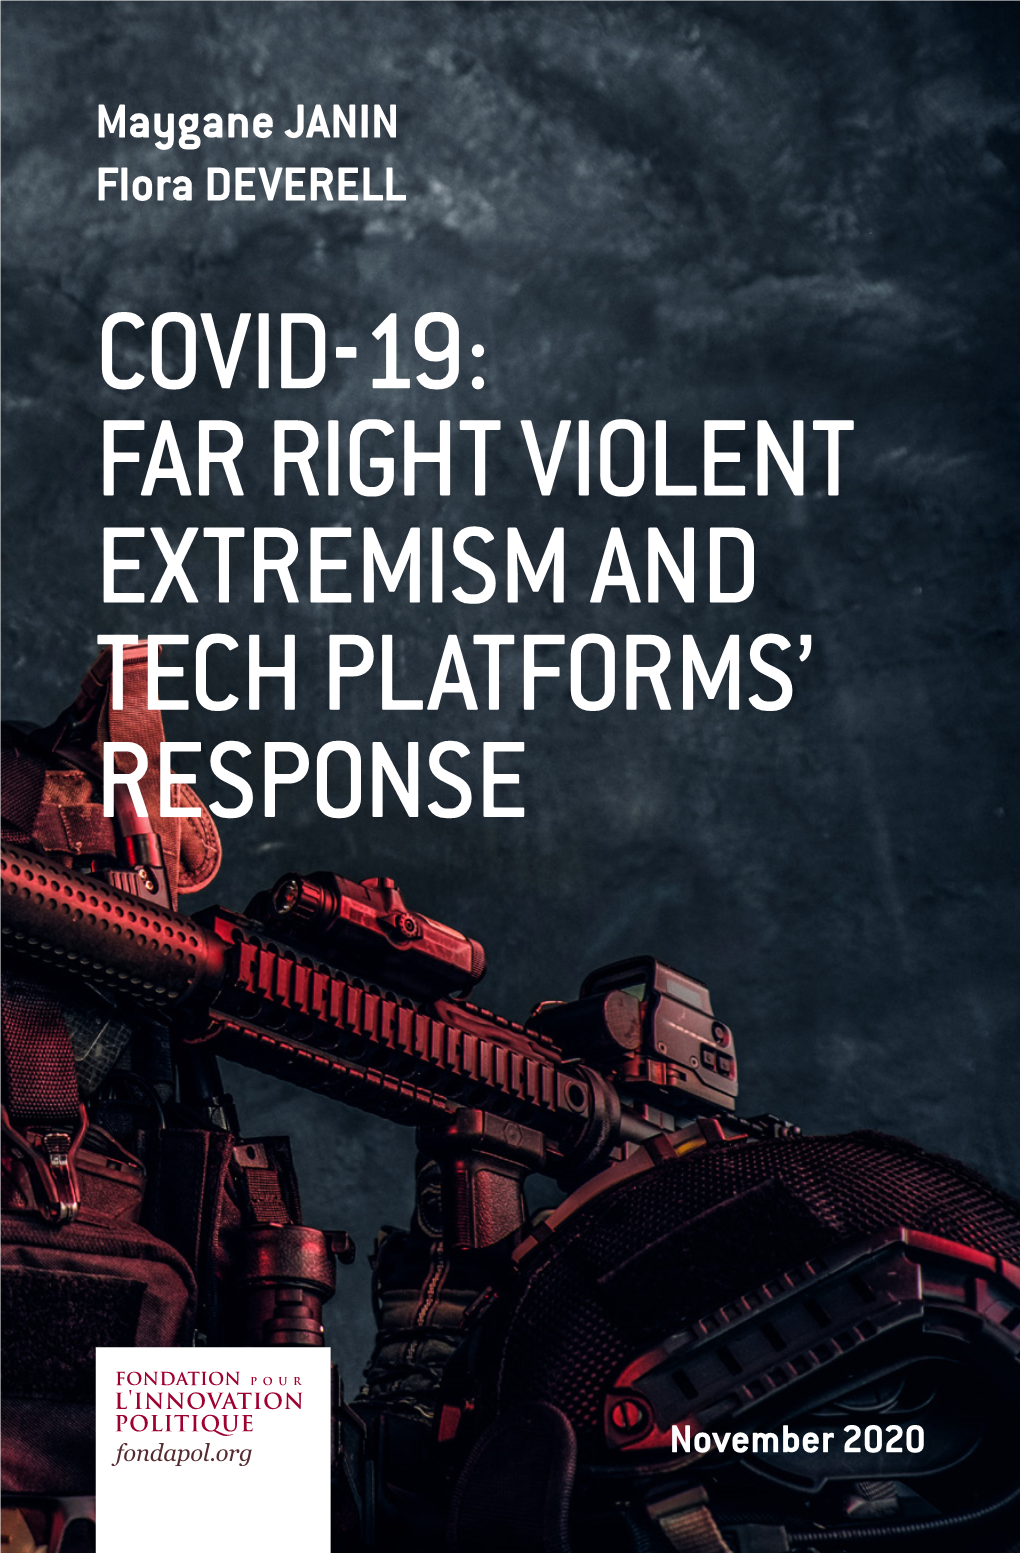 Far Right Violent Extremism and Tech Platforms’ Response